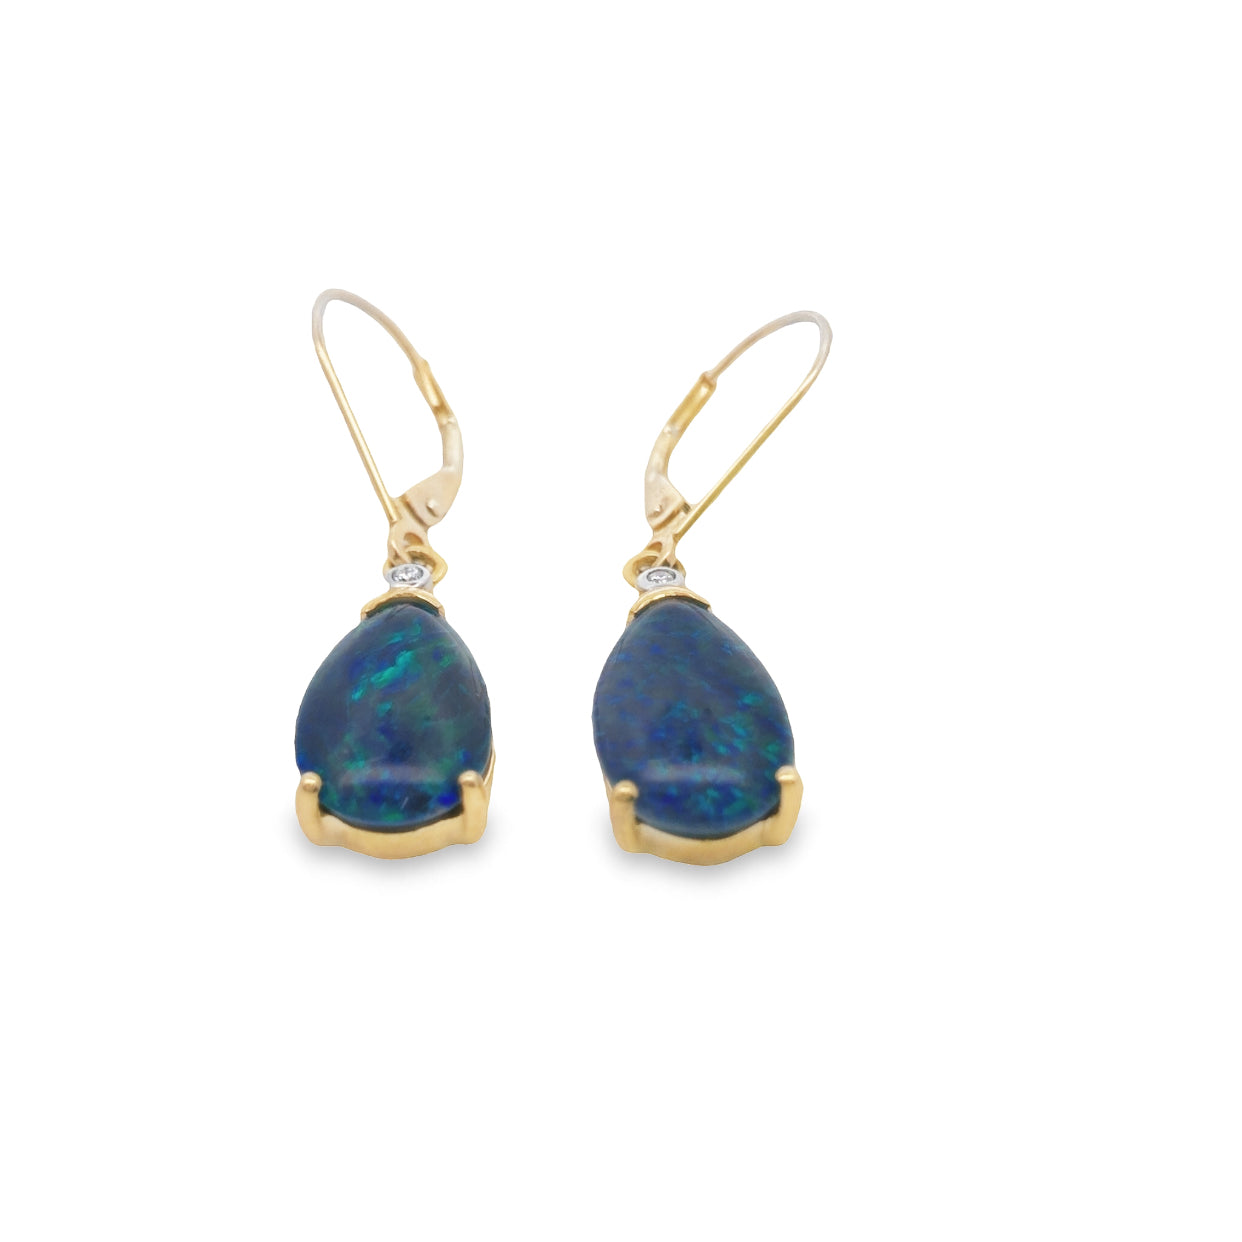 9Ct Yellow Gold Drop Earrings Set With 13X8mm Pear Shaped Blue/Green Triplet Opal And Diamonds With Continental Clips.